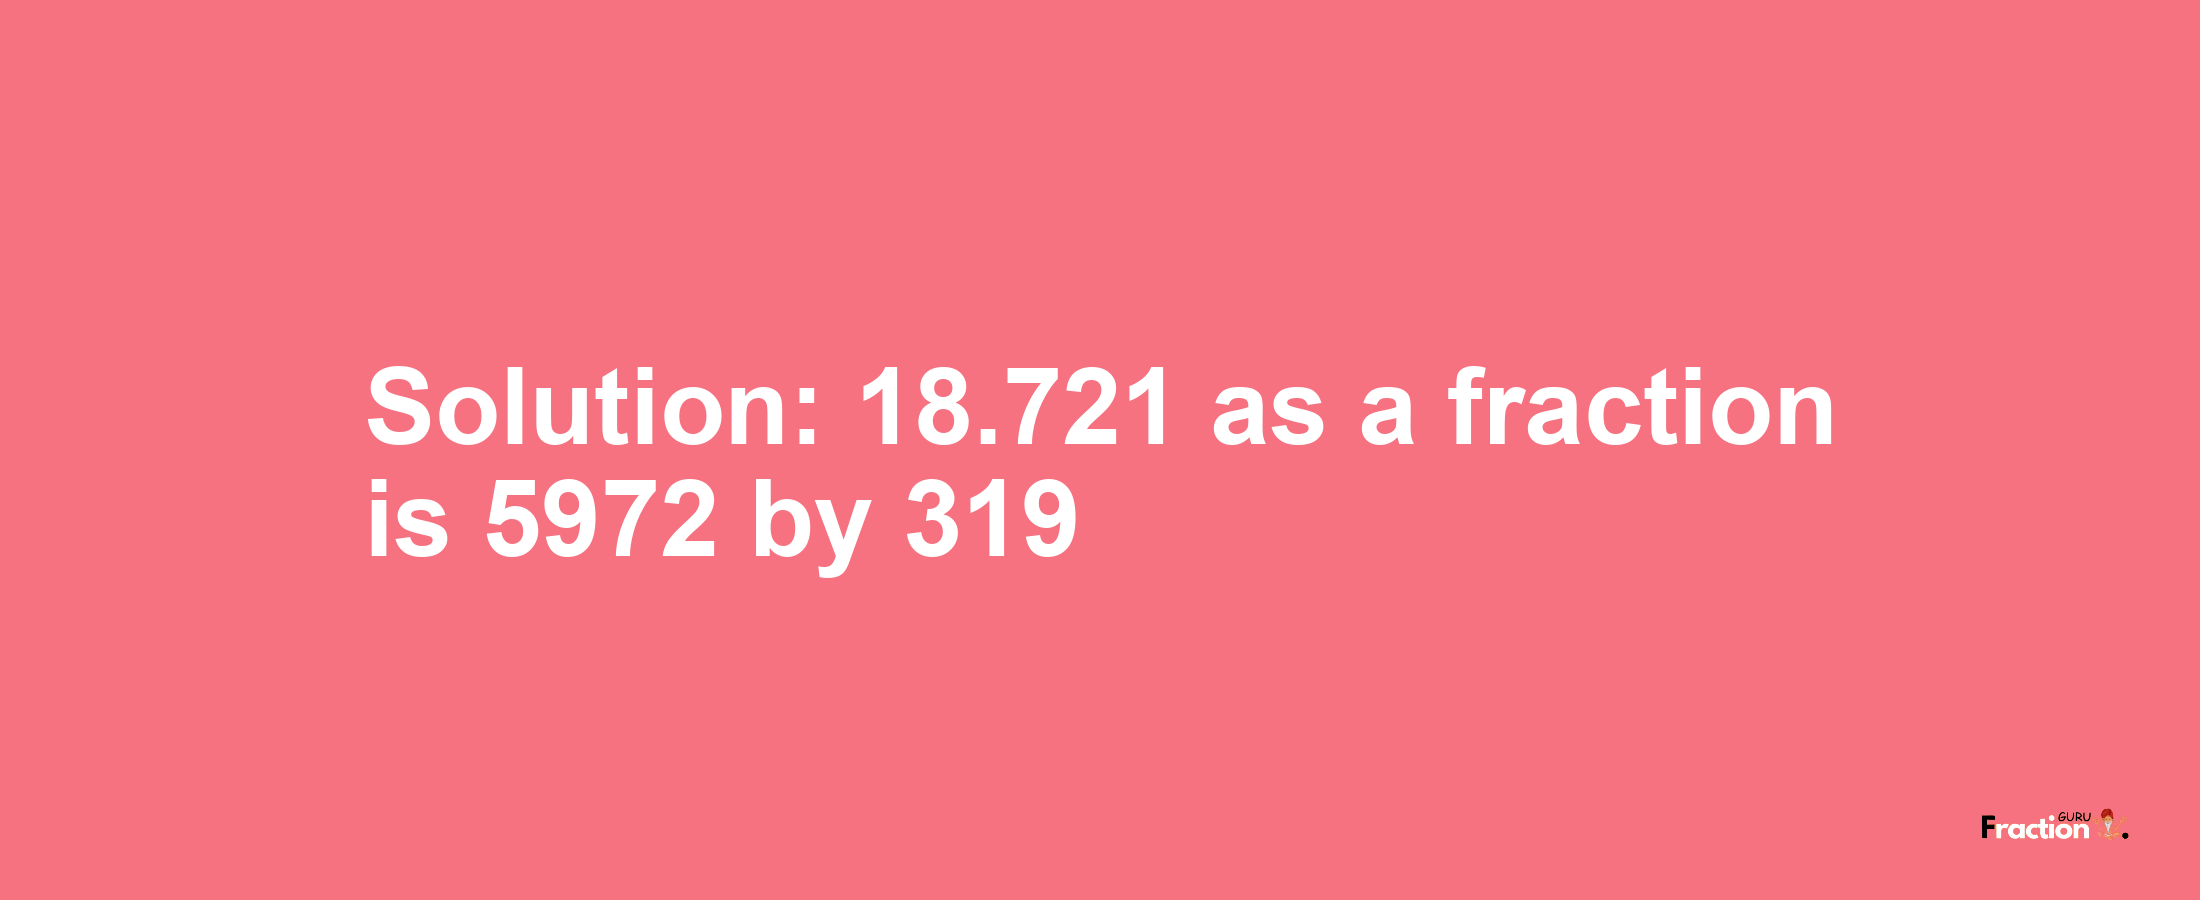 Solution:18.721 as a fraction is 5972/319